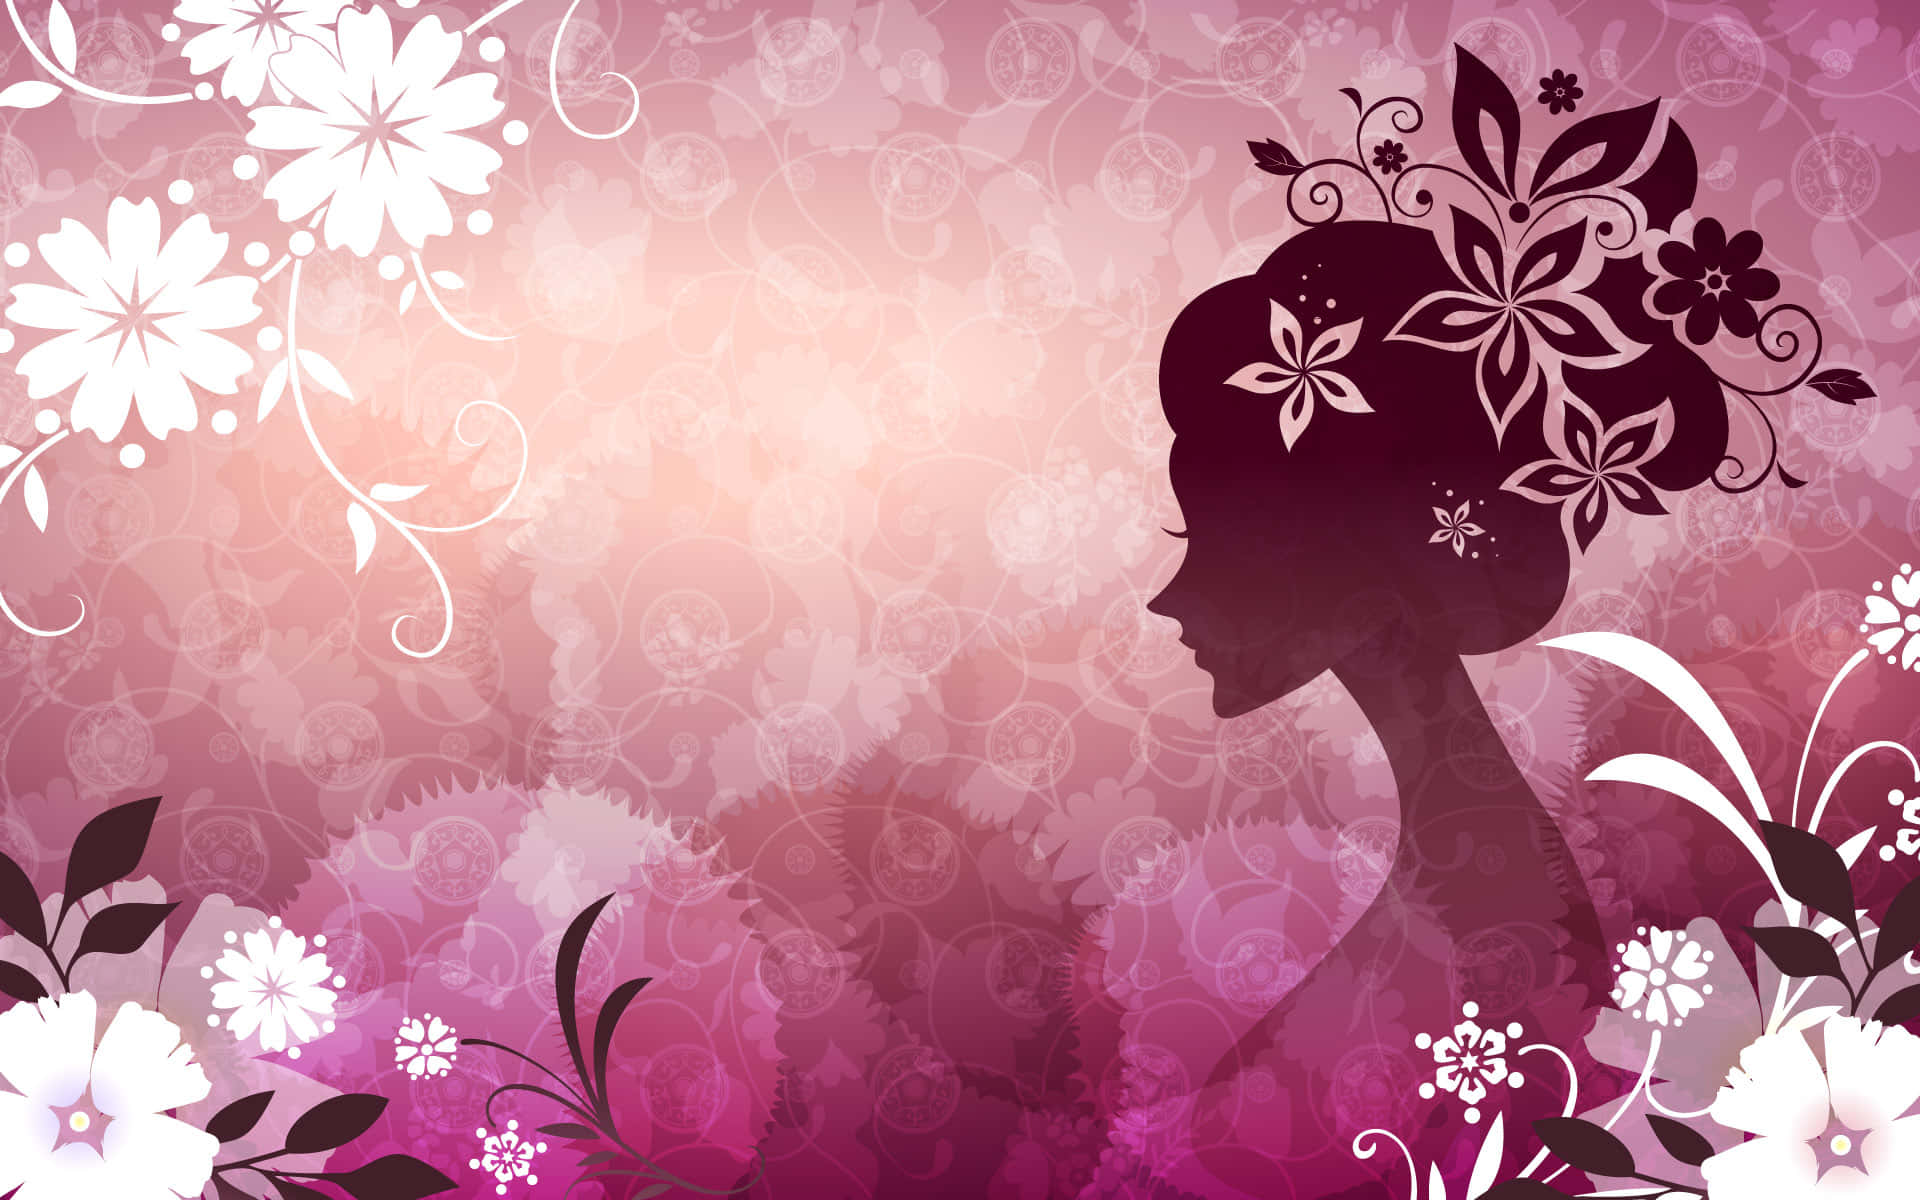 A Woman's Silhouette With Flowers On A Pink Background